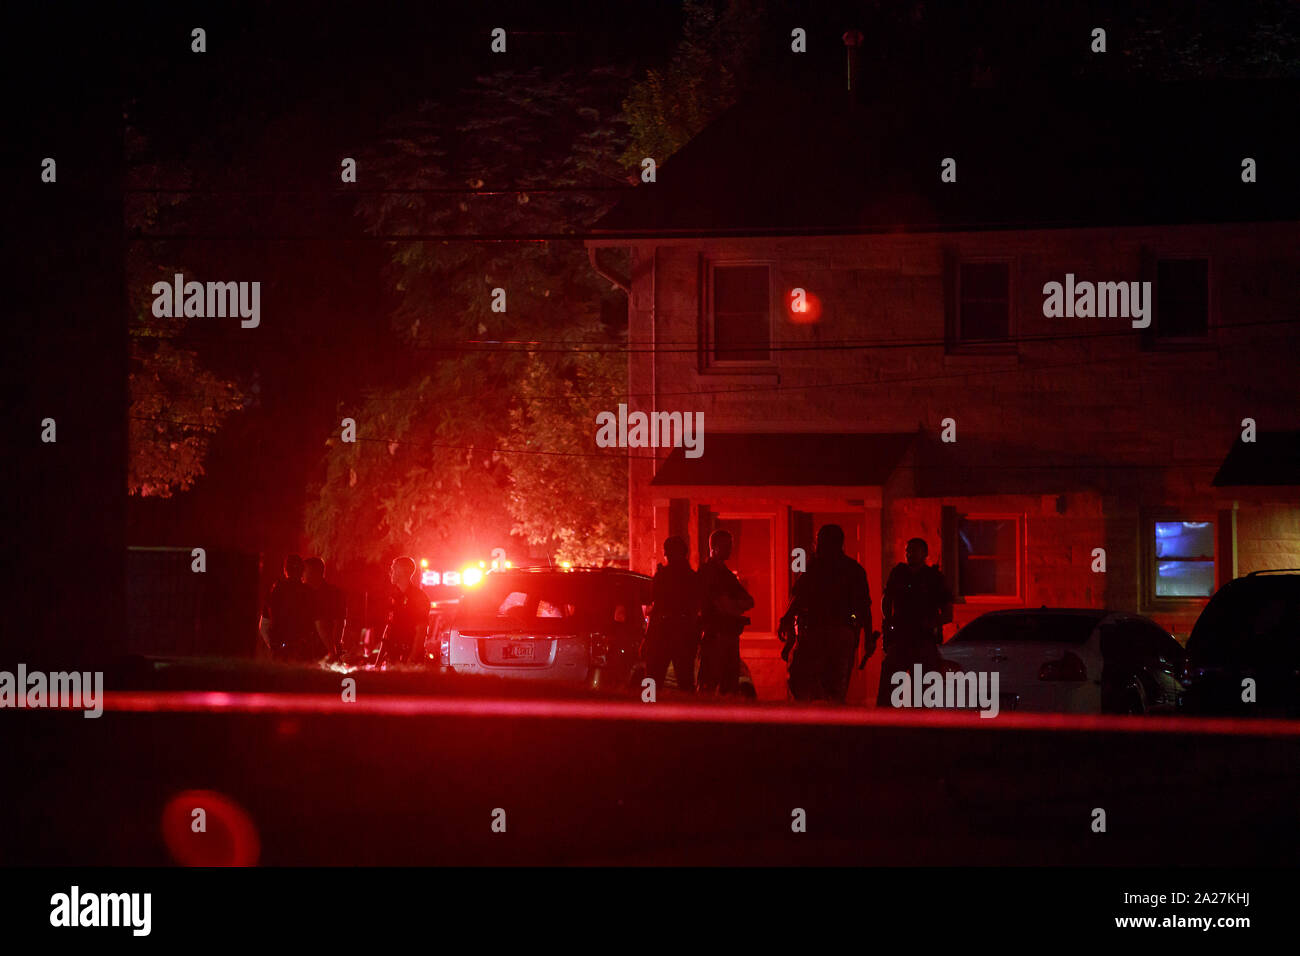 Members of the Bloomington Police Department and the Monroe County Sheriff's Office investigate after a shooting in the 1300 block of West 13th Street, Monday, September 2, 2019 in Bloomington, Ind. The shooting was shortly before 10 p.m. According to Bloomington Police Dept. Lt. Lucas Tate officers were called to the area during a disturbance and reports of shots fired, and as the police arrived officers also reported shots fired. Upon arrival police located 2 gun shot victims; a male was shot in the leg, and a female was shot in the foot. The gunshot wounds were not life threatening and both Stock Photo